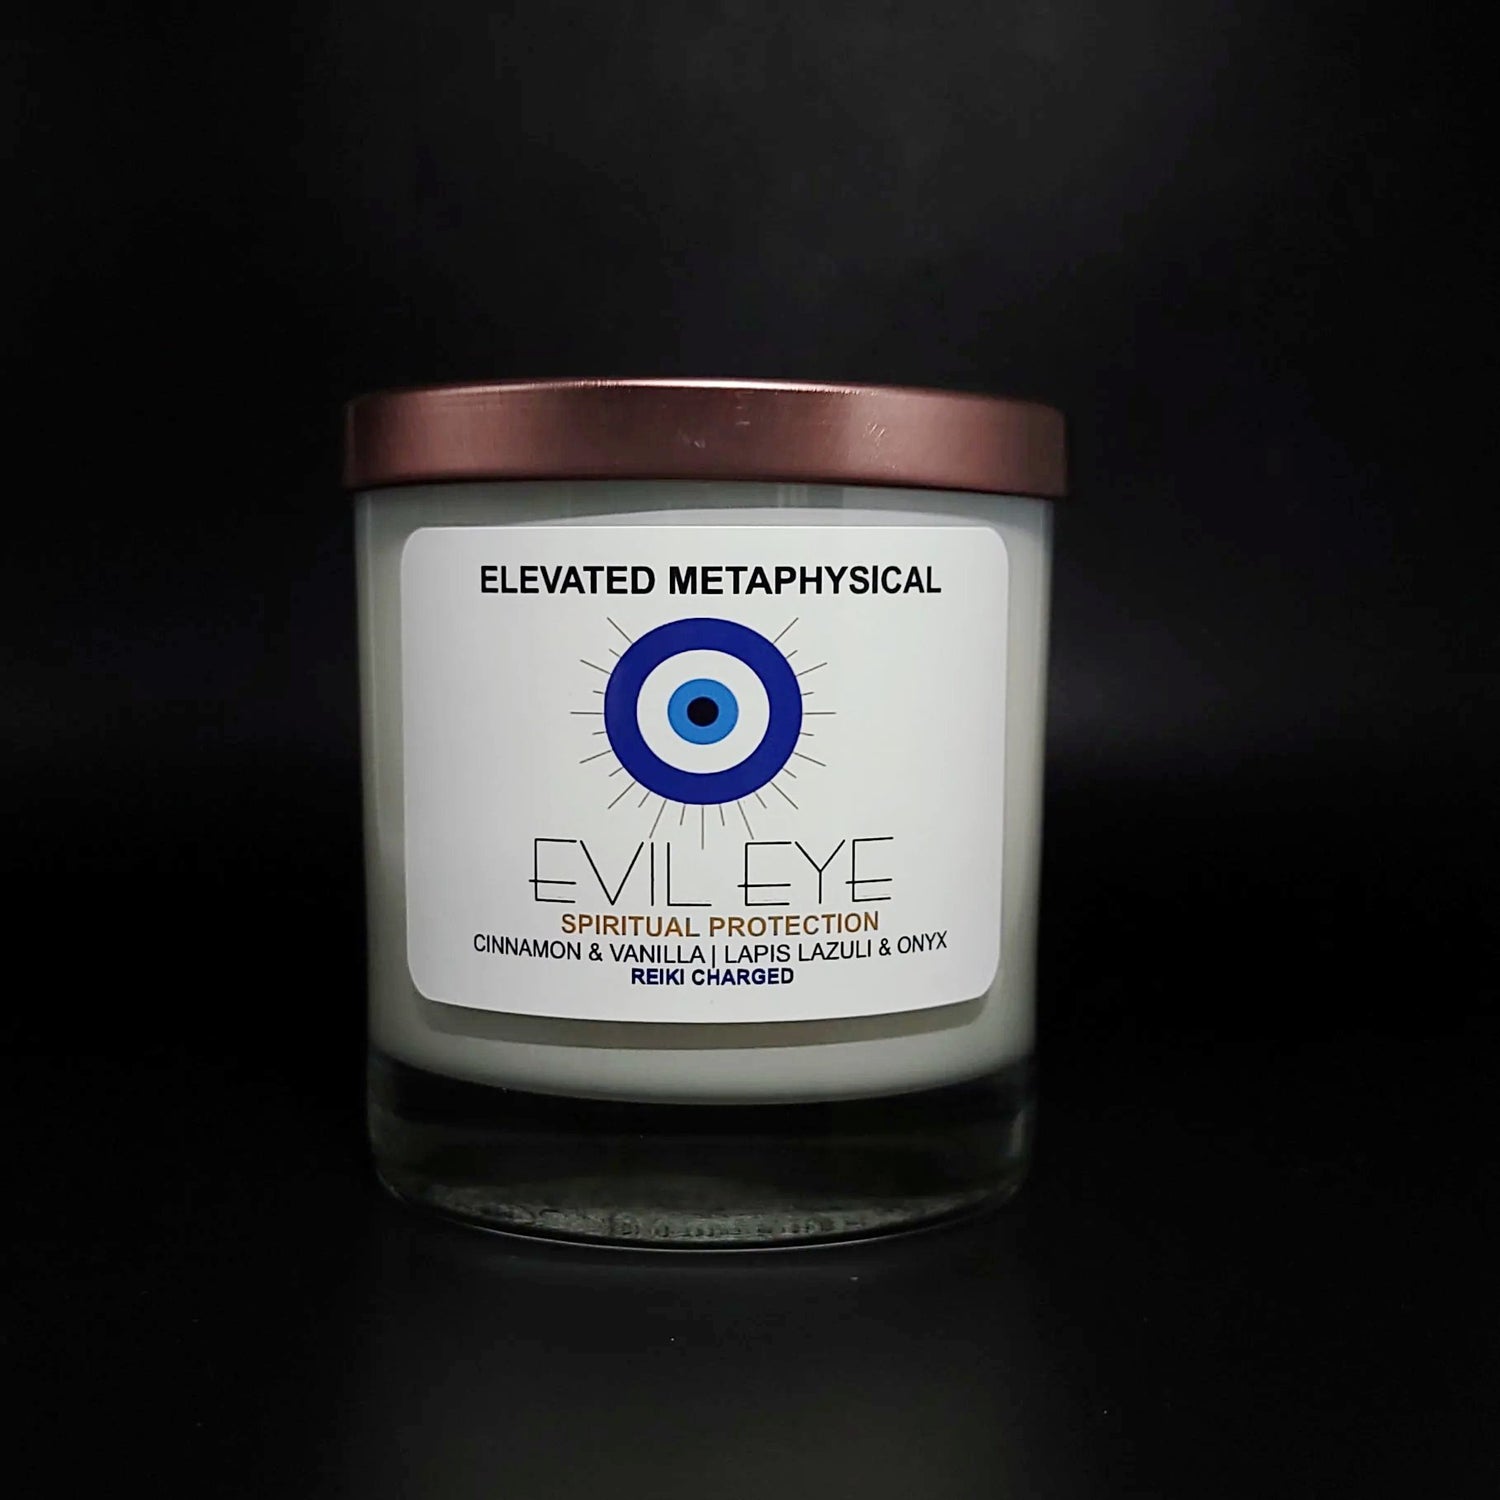 Evil Eye Crystal Candle Cinnamon & Vanilla Scented 11oz 310g - Elevated Metaphysical